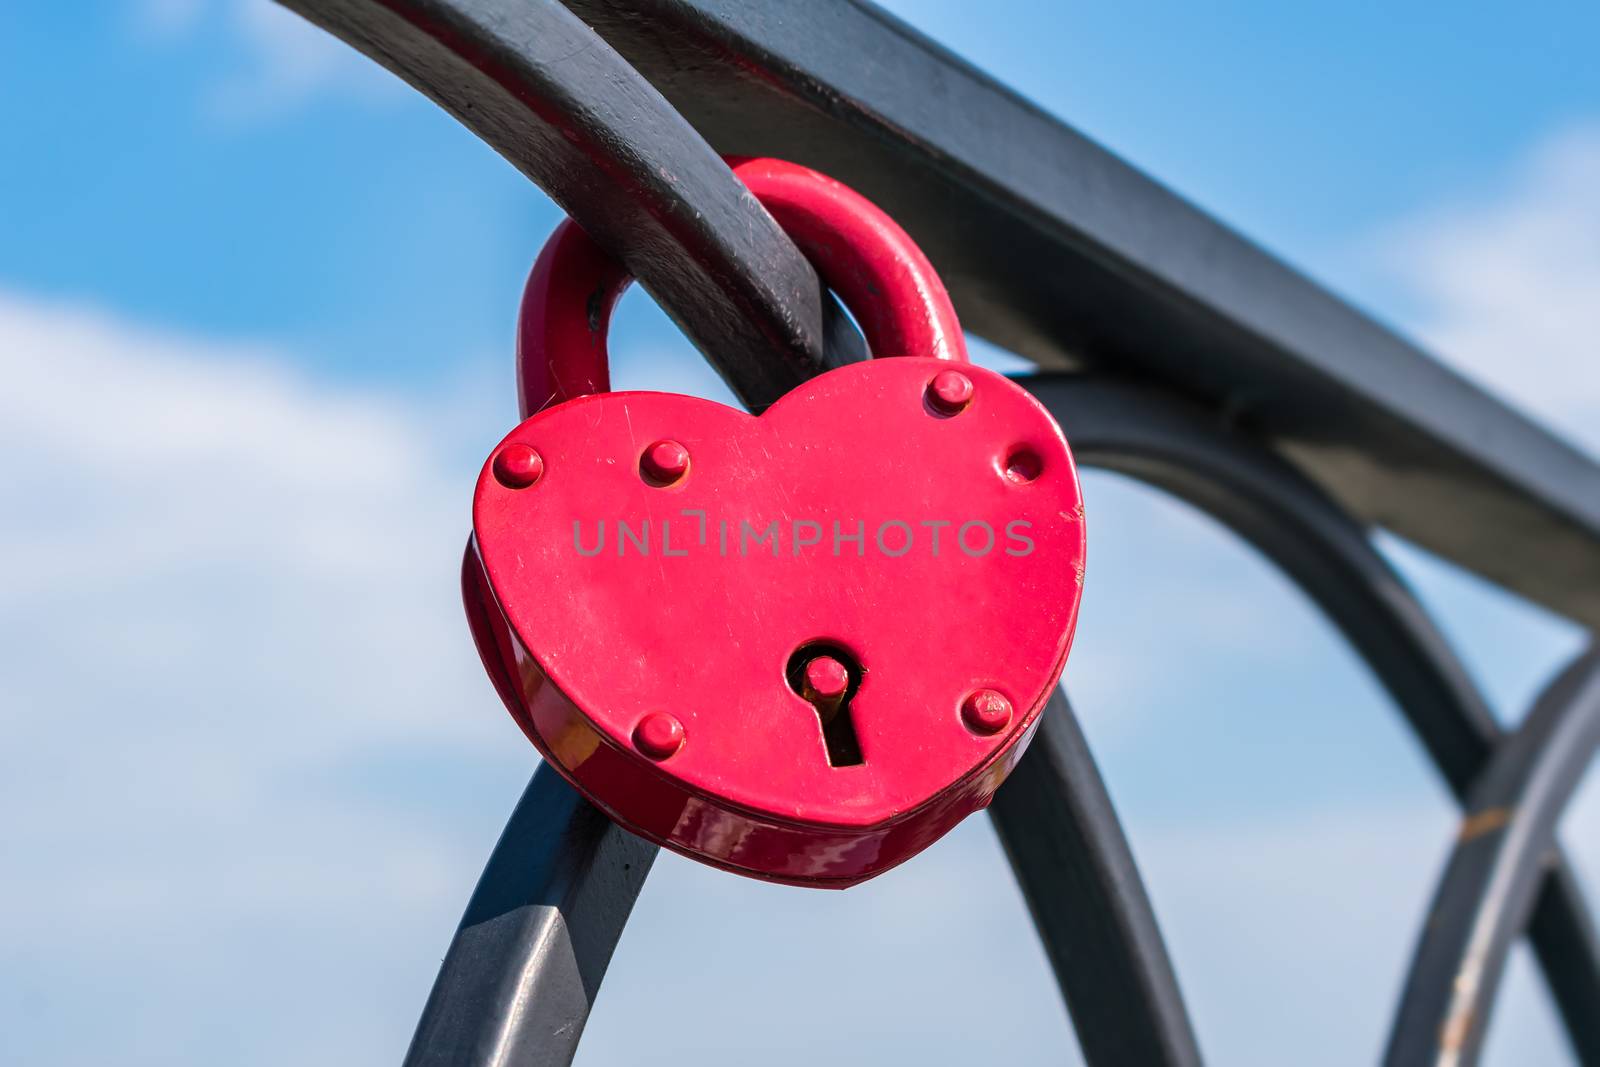 Decorative pendant lock for lovers that can be locked on the bridge during the wedding